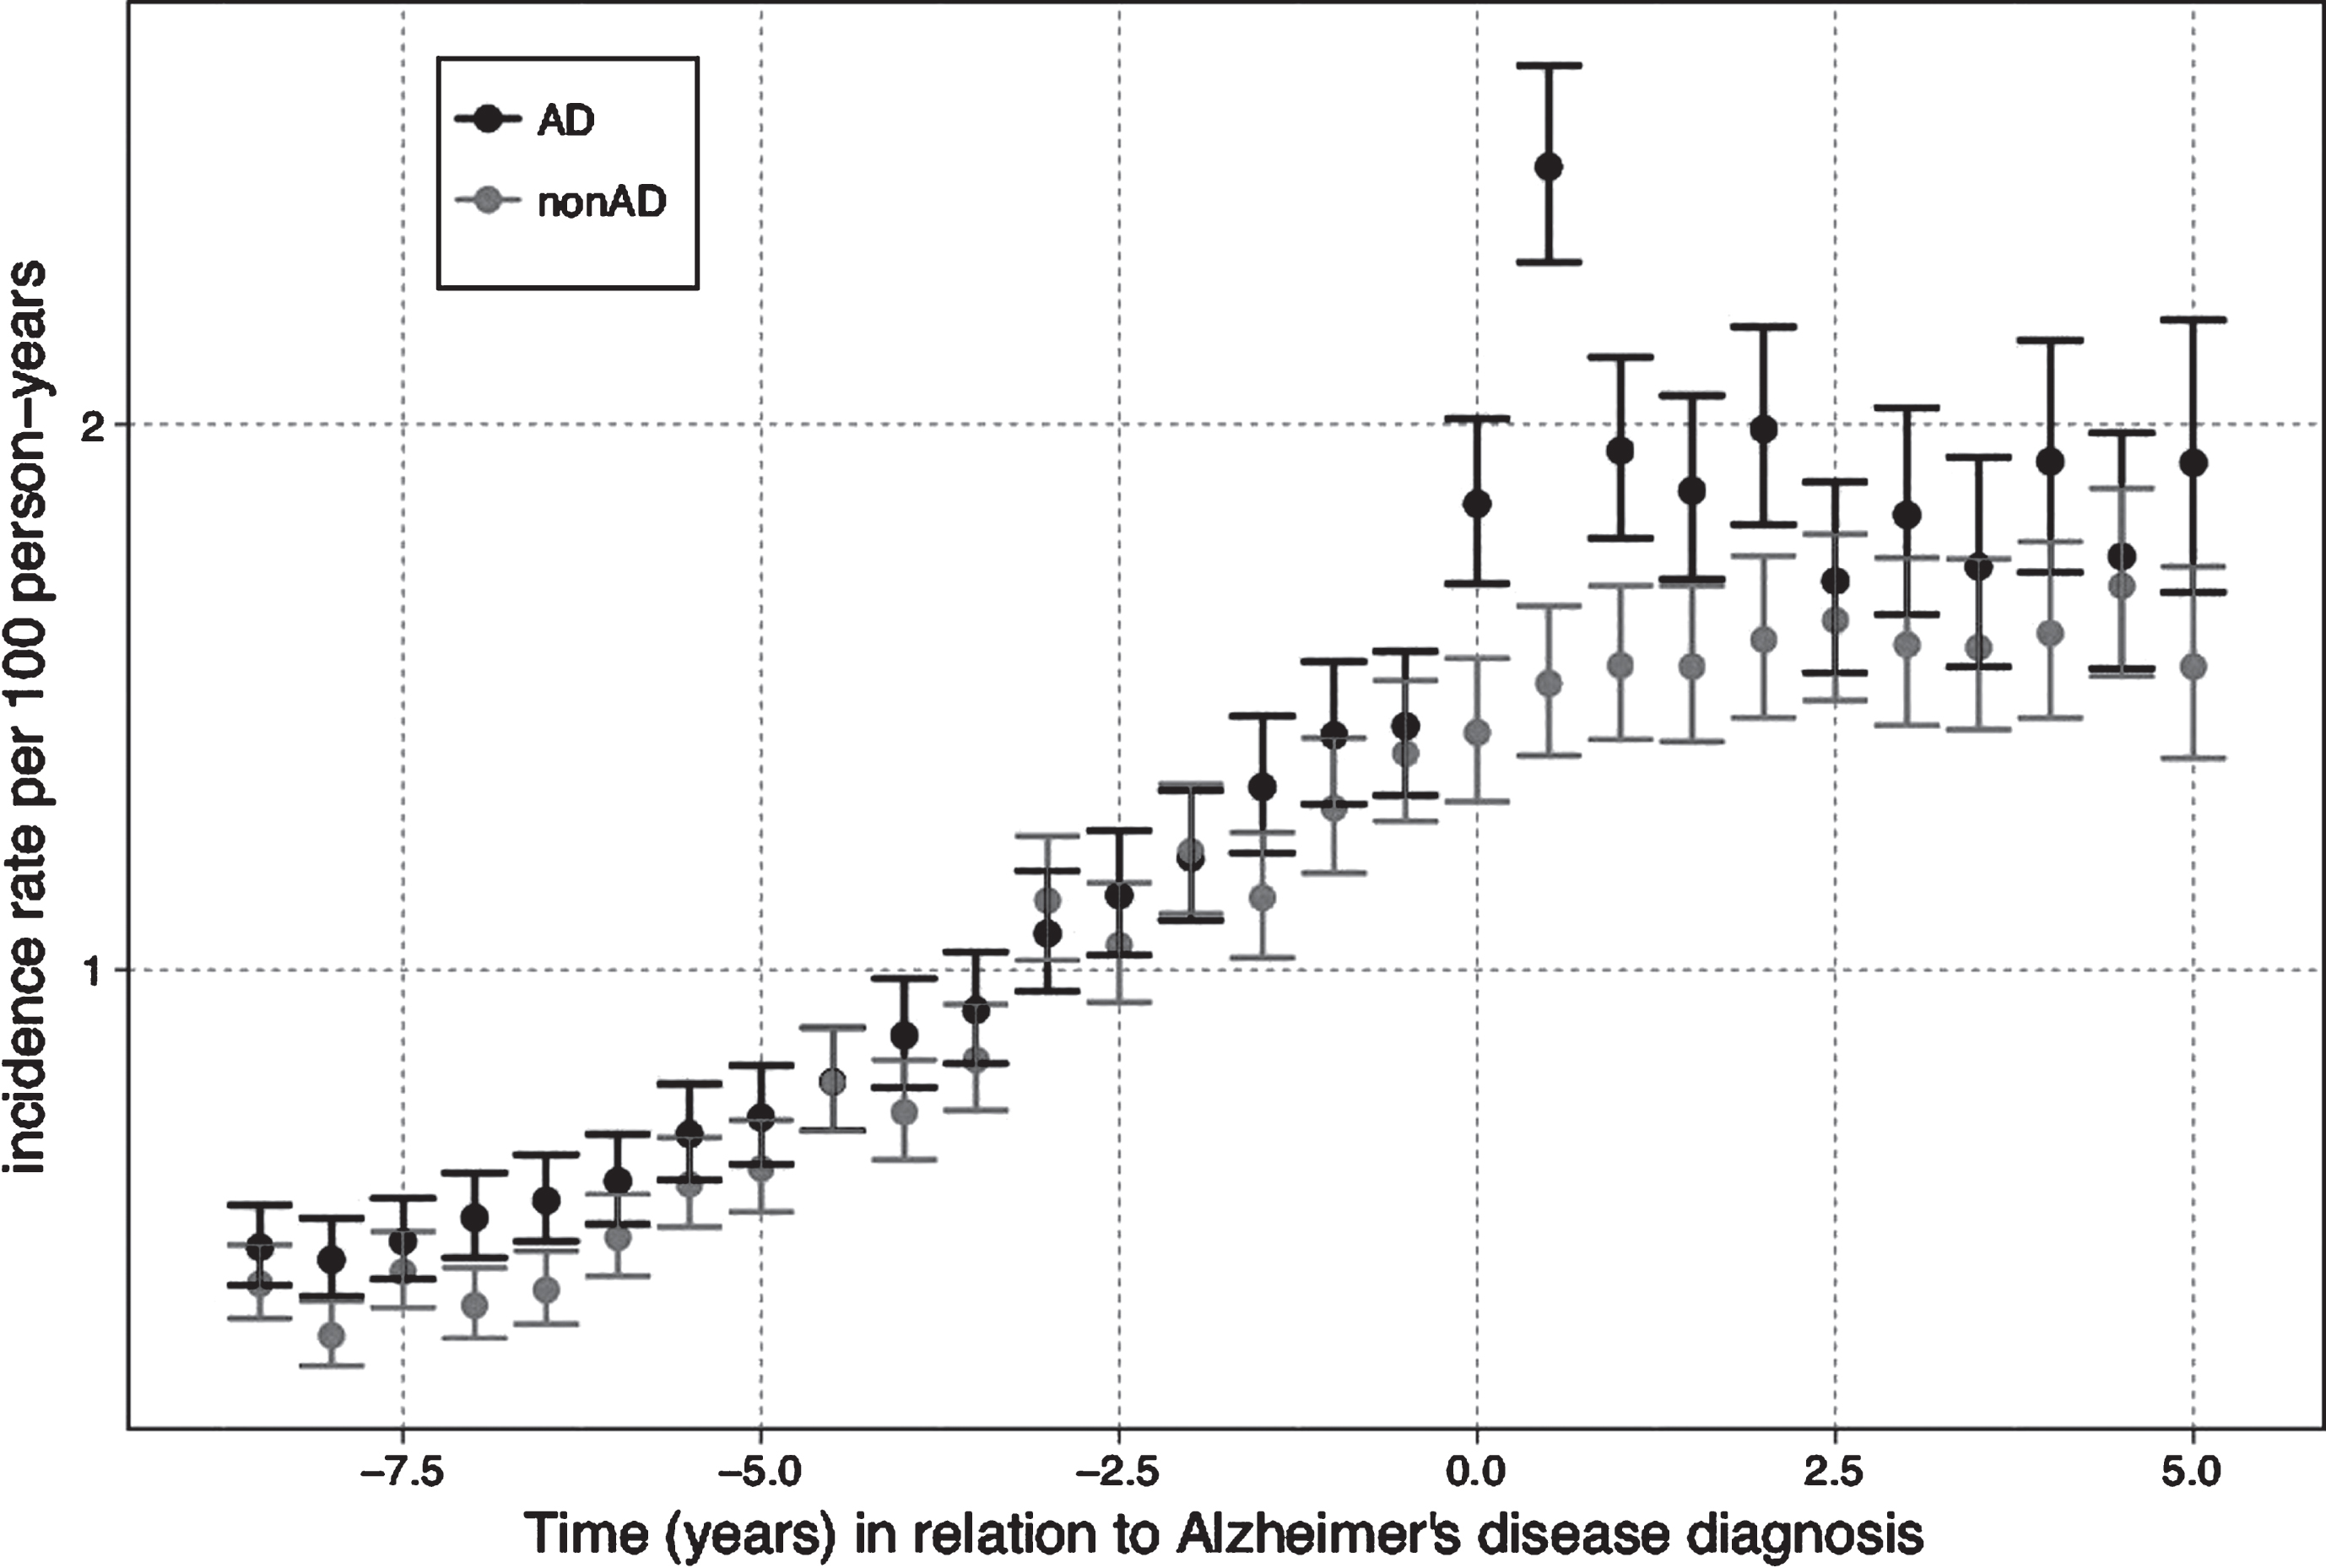 The incidence of antiepileptic use in relation to Alzheimer’s disease (AD) diagnosis.